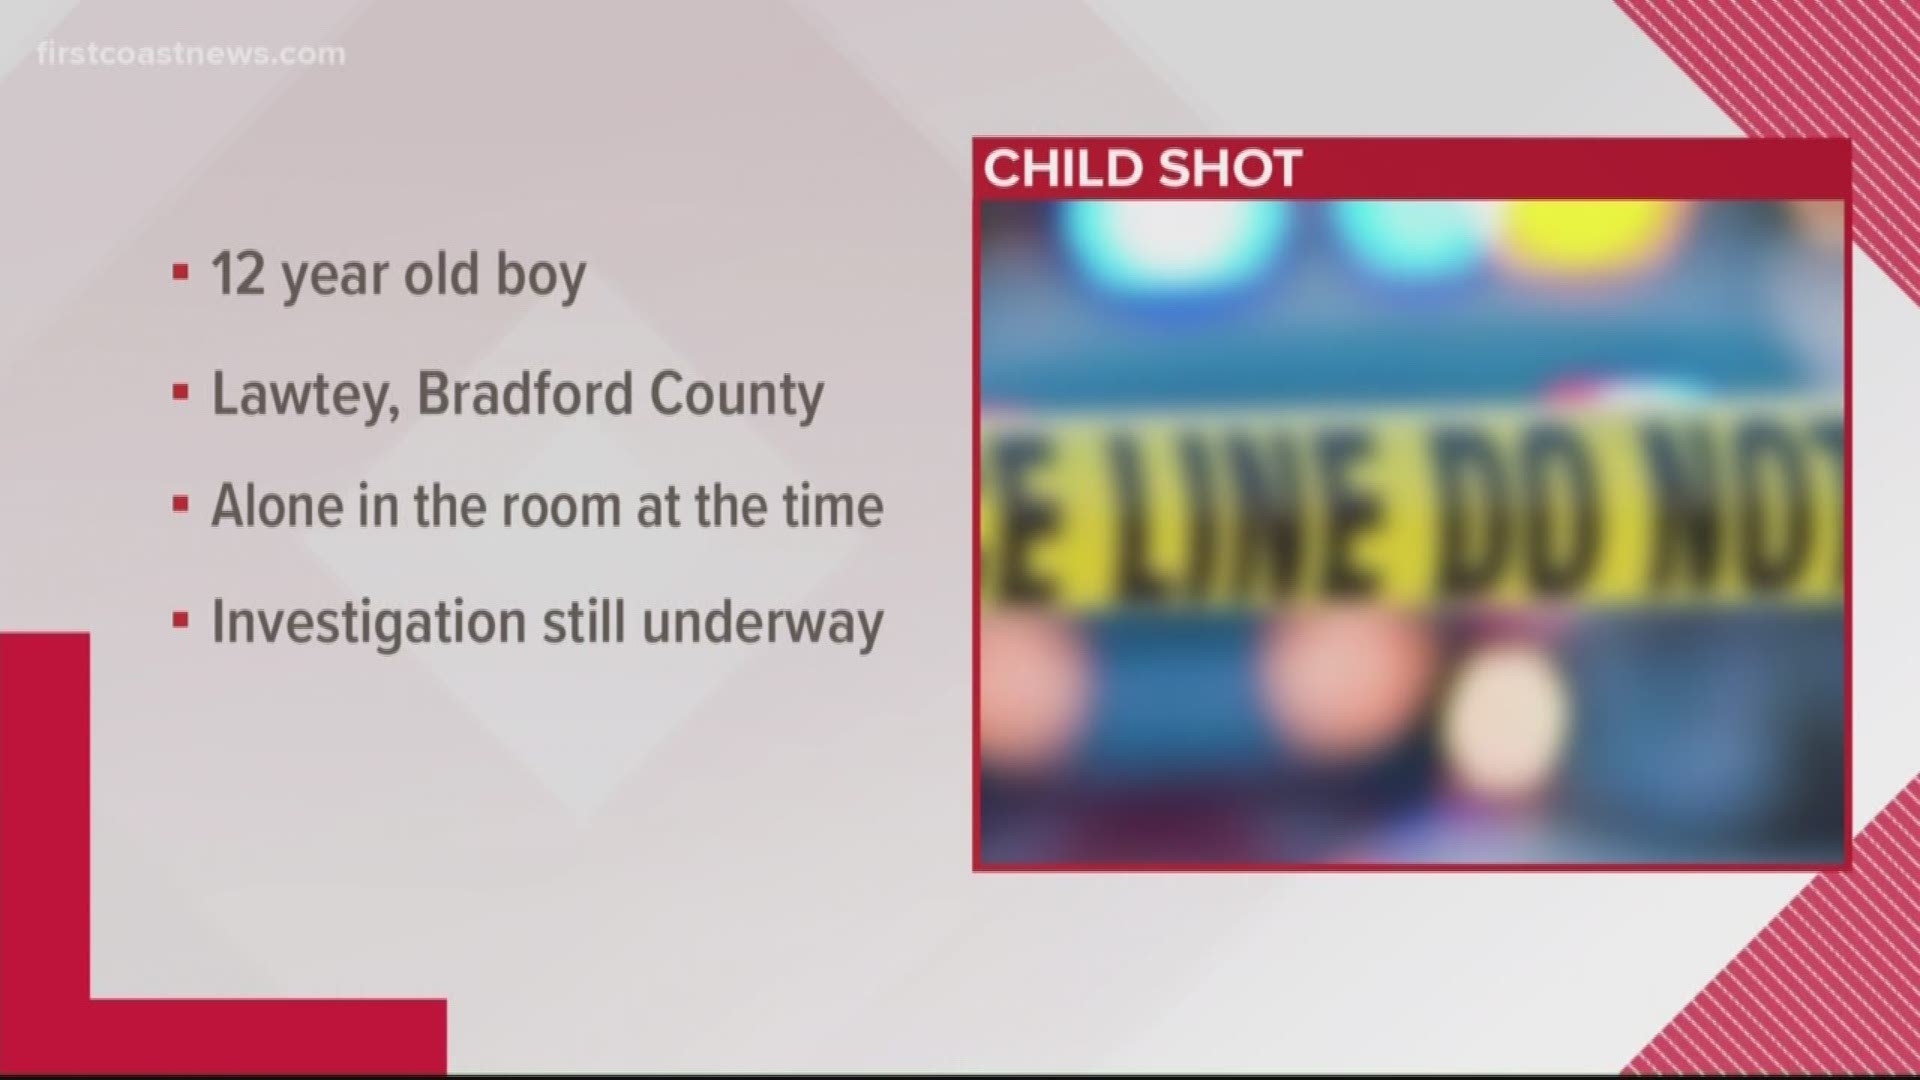 Police are not looking for a suspect, saying the boy was the only one in the room when he suffered the gunshot wound.